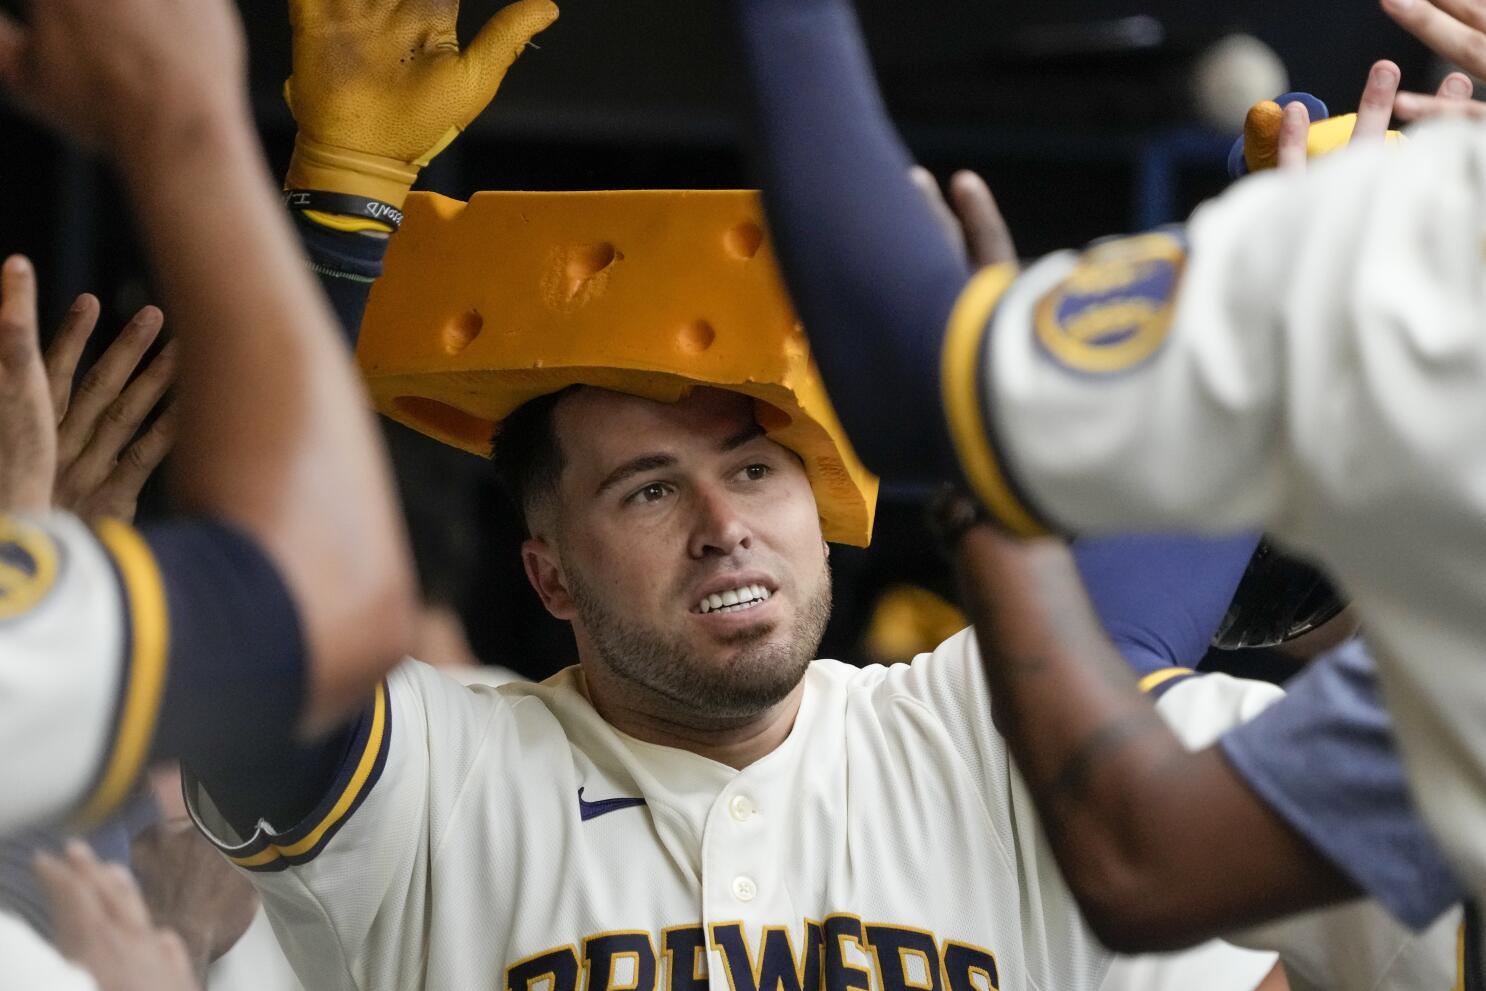 Caratini 8th-inning homer lifts Brewers over Cubs 6-5, overcoming